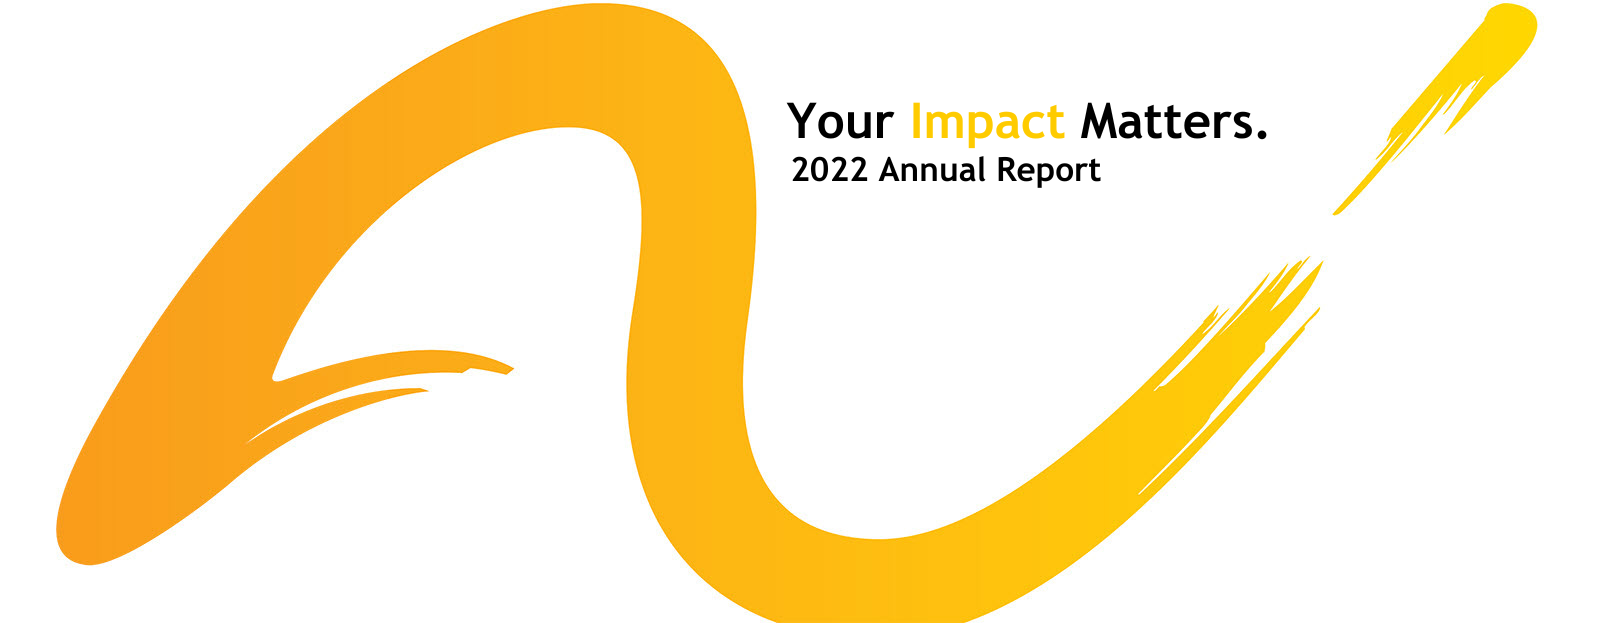 Your Impact Matter 2022 Annual Report